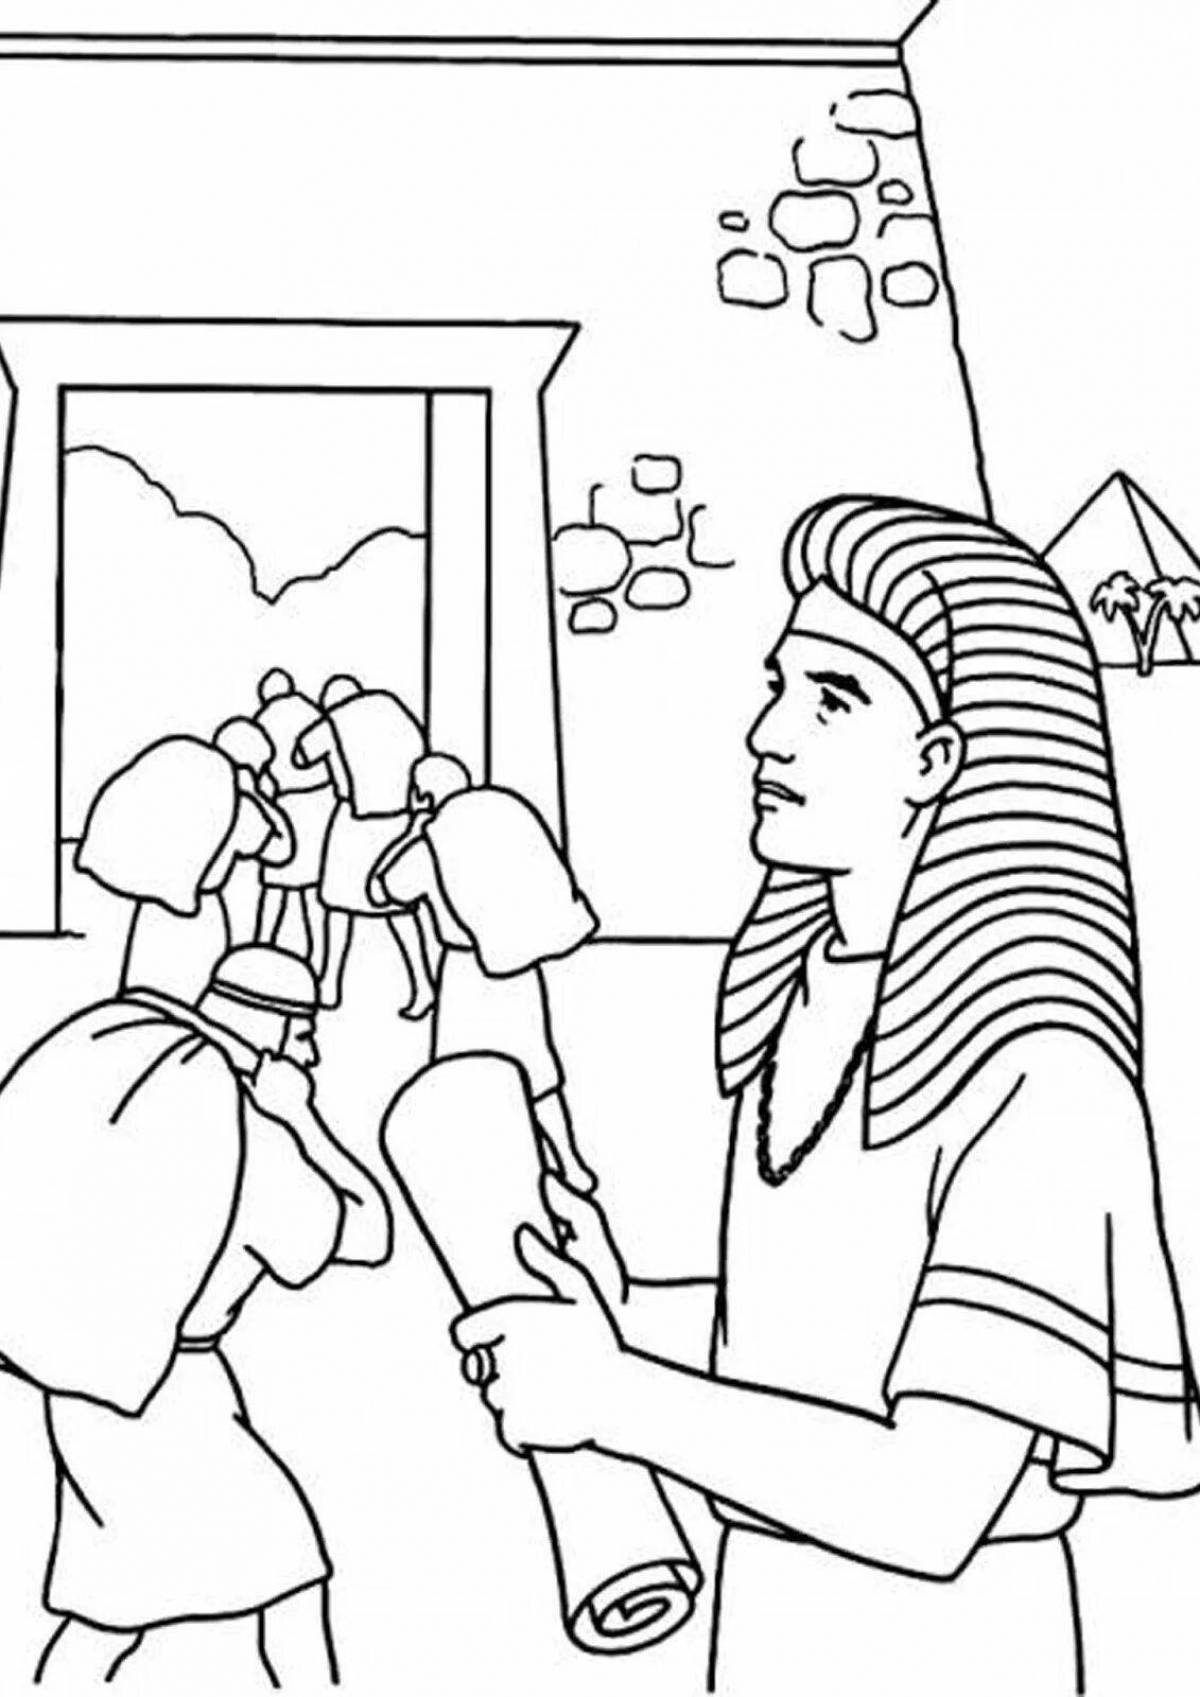 Joseph Jolly Coloring Page